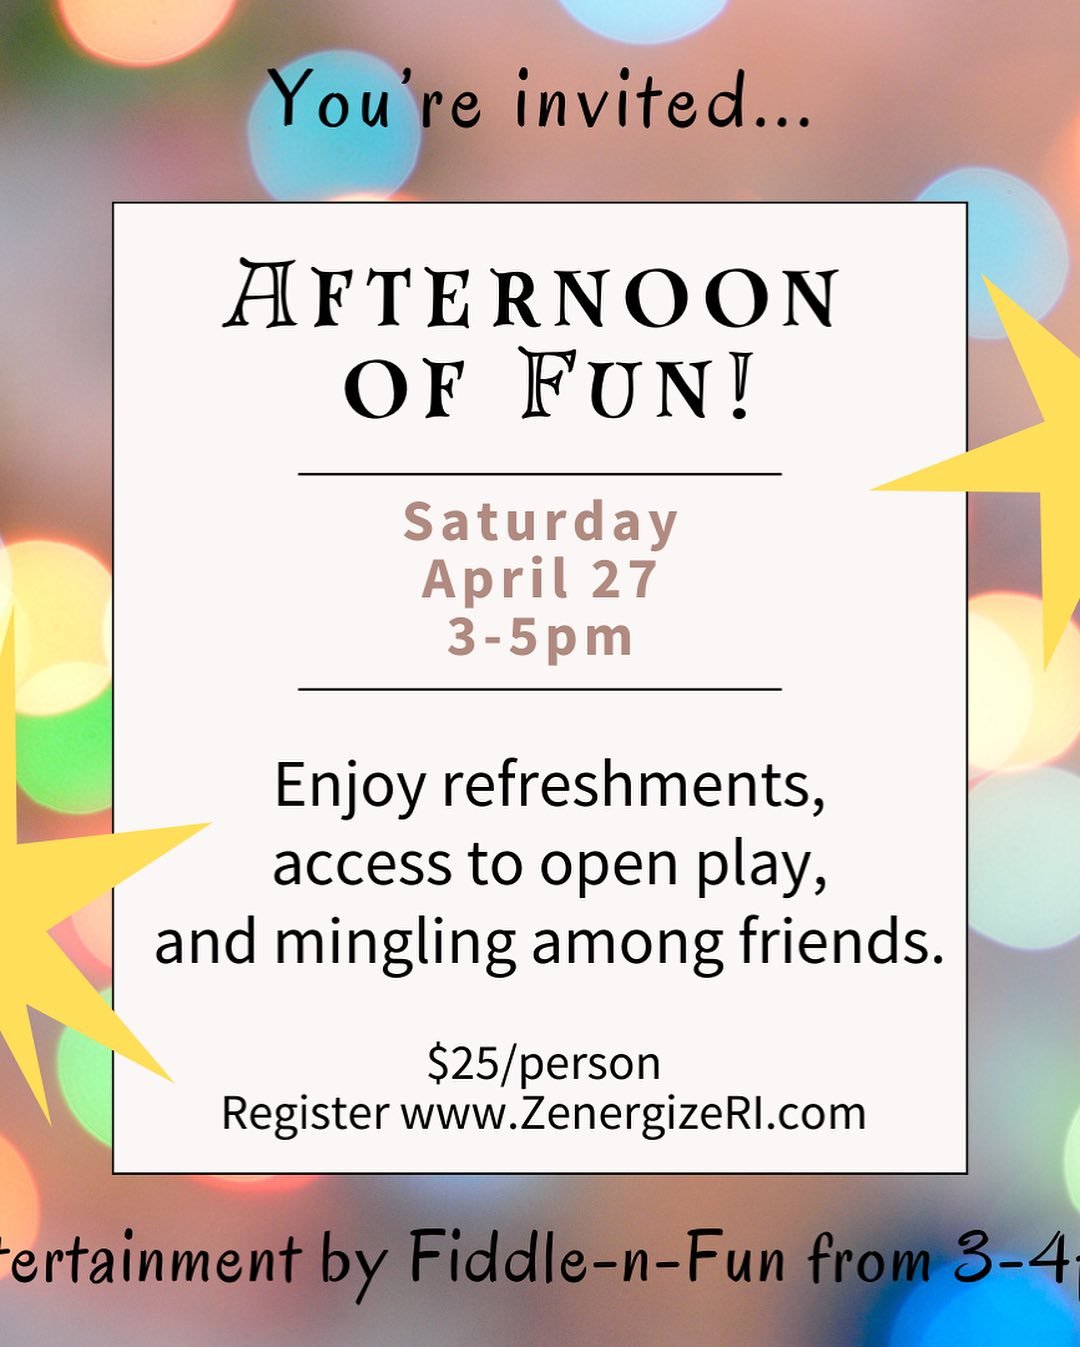 Looking for a #kid friendly #saturday afternoon activity? Join us for an Afternoon of Fun! 🤩 Saturday, April 27 at 3pm❗️
Tickets are $25/person and include refreshments #openplay pass, music &amp; #entertainment featuring Fiddle N&rsquo; Fun!
It&rsq